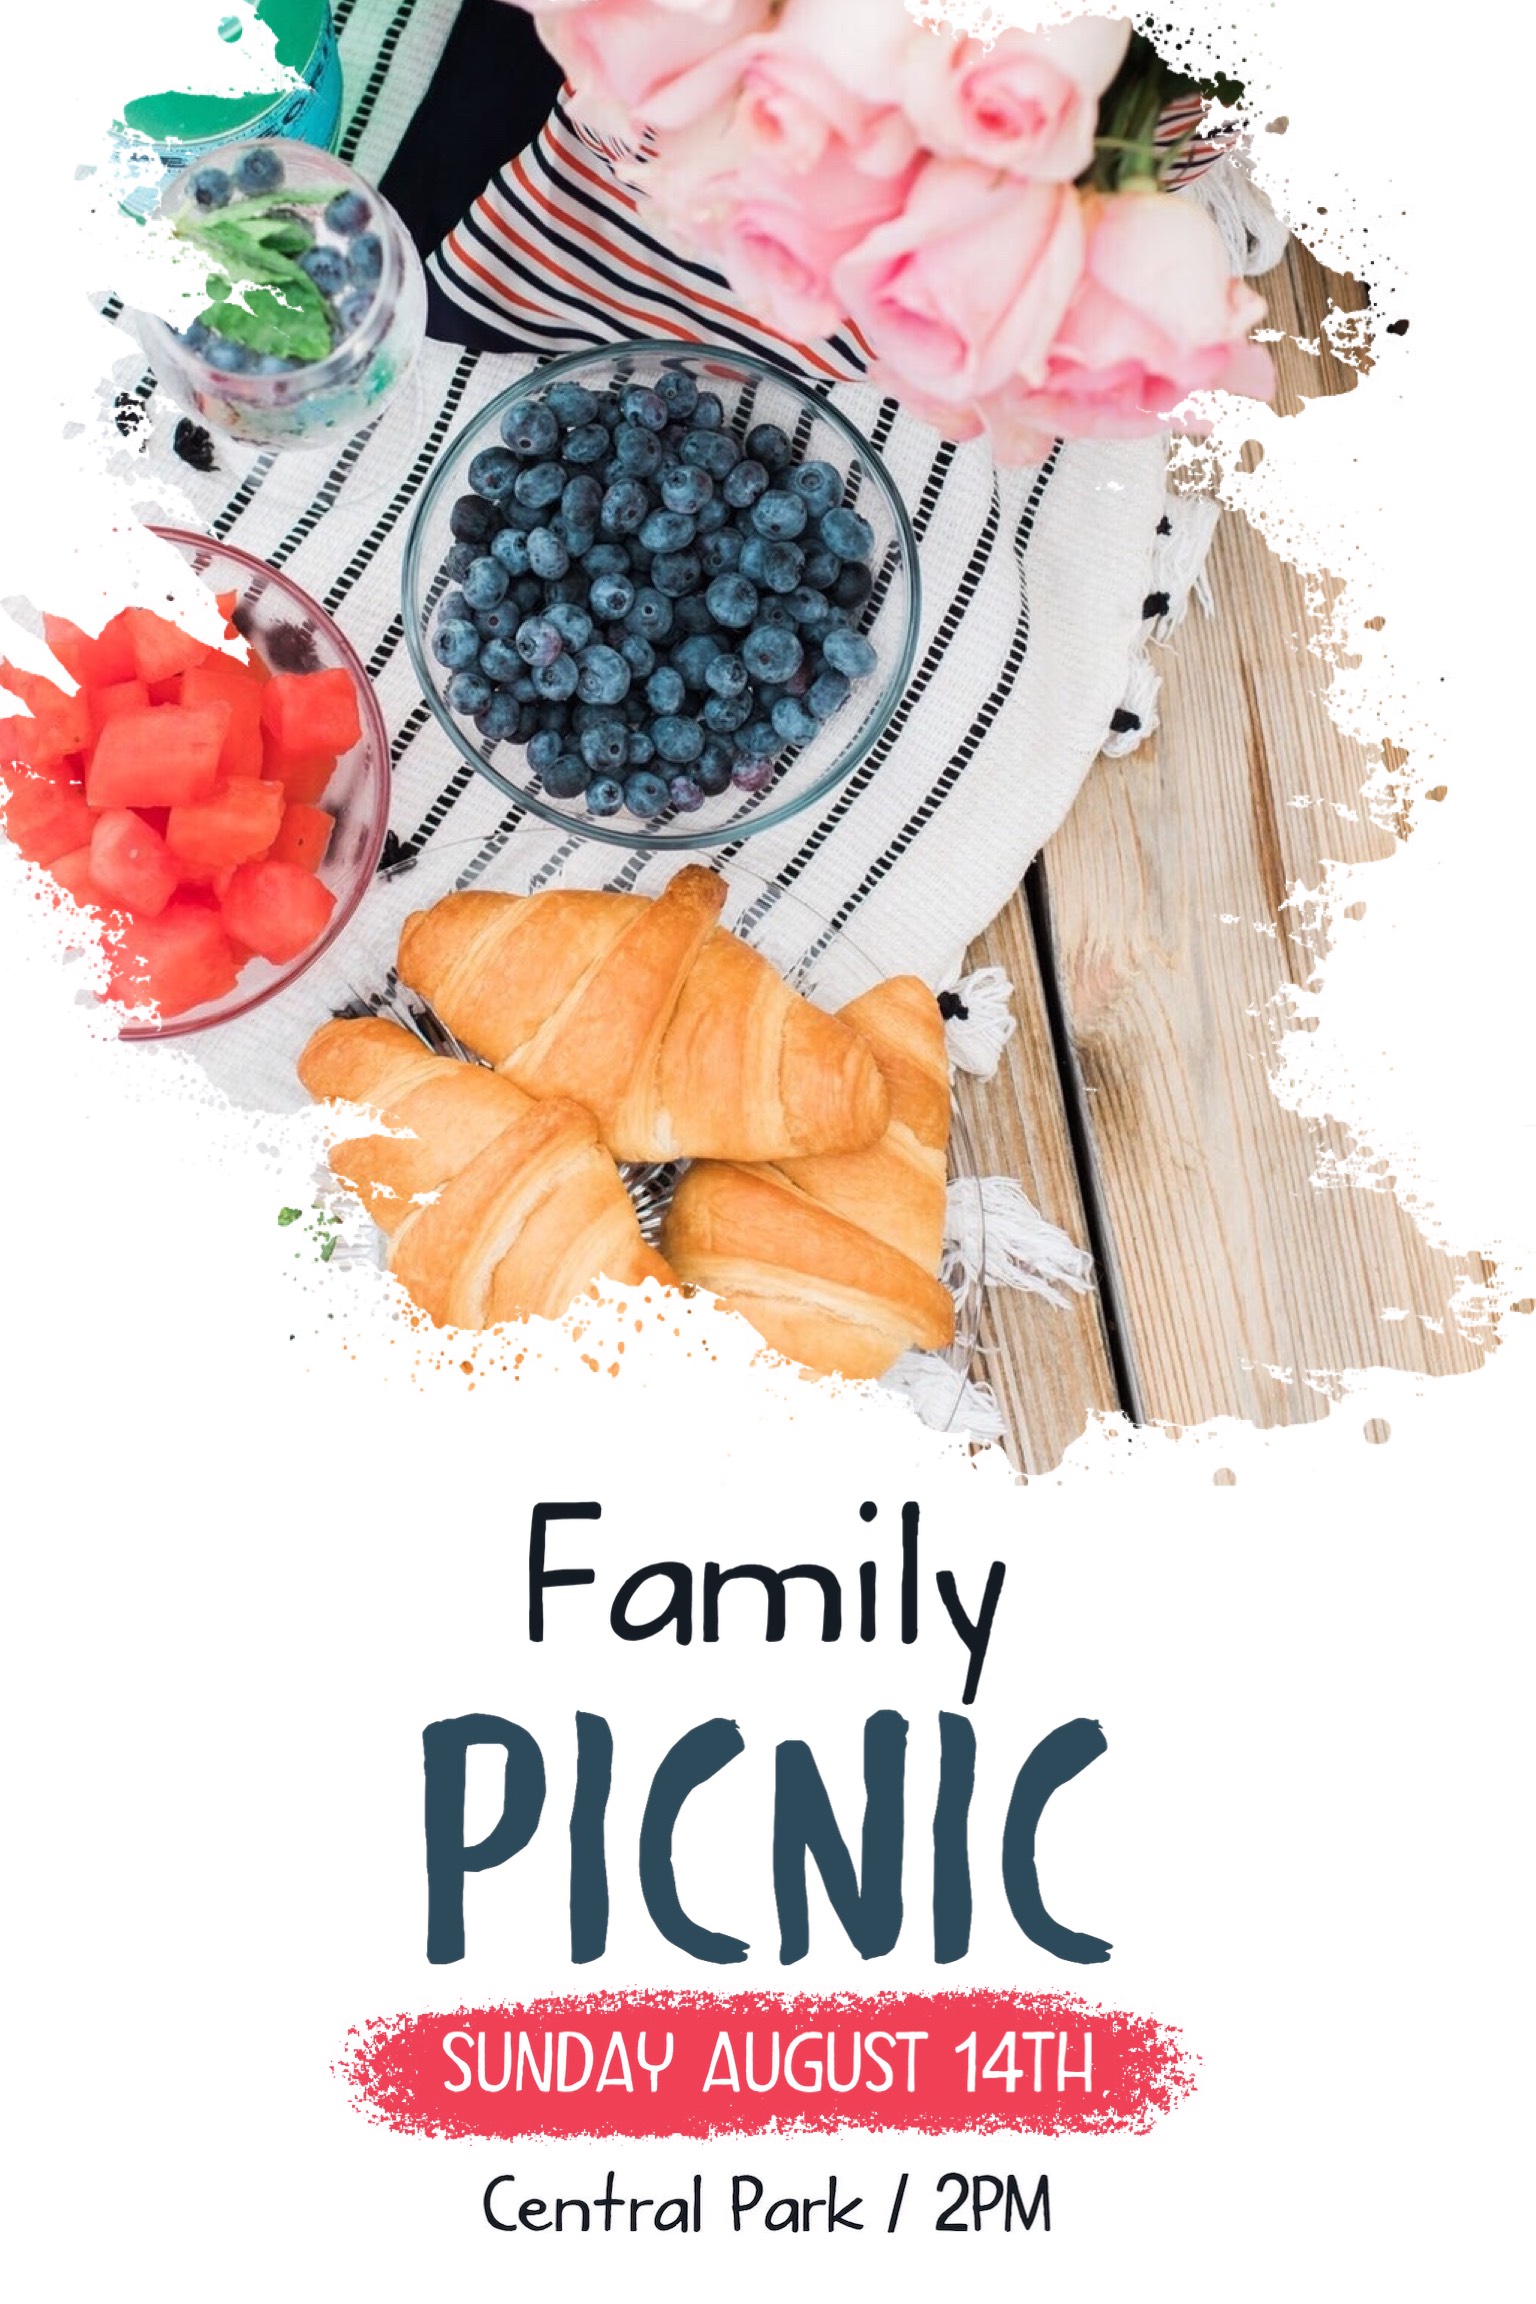 Family picnic with croissants on Sunday invitation template